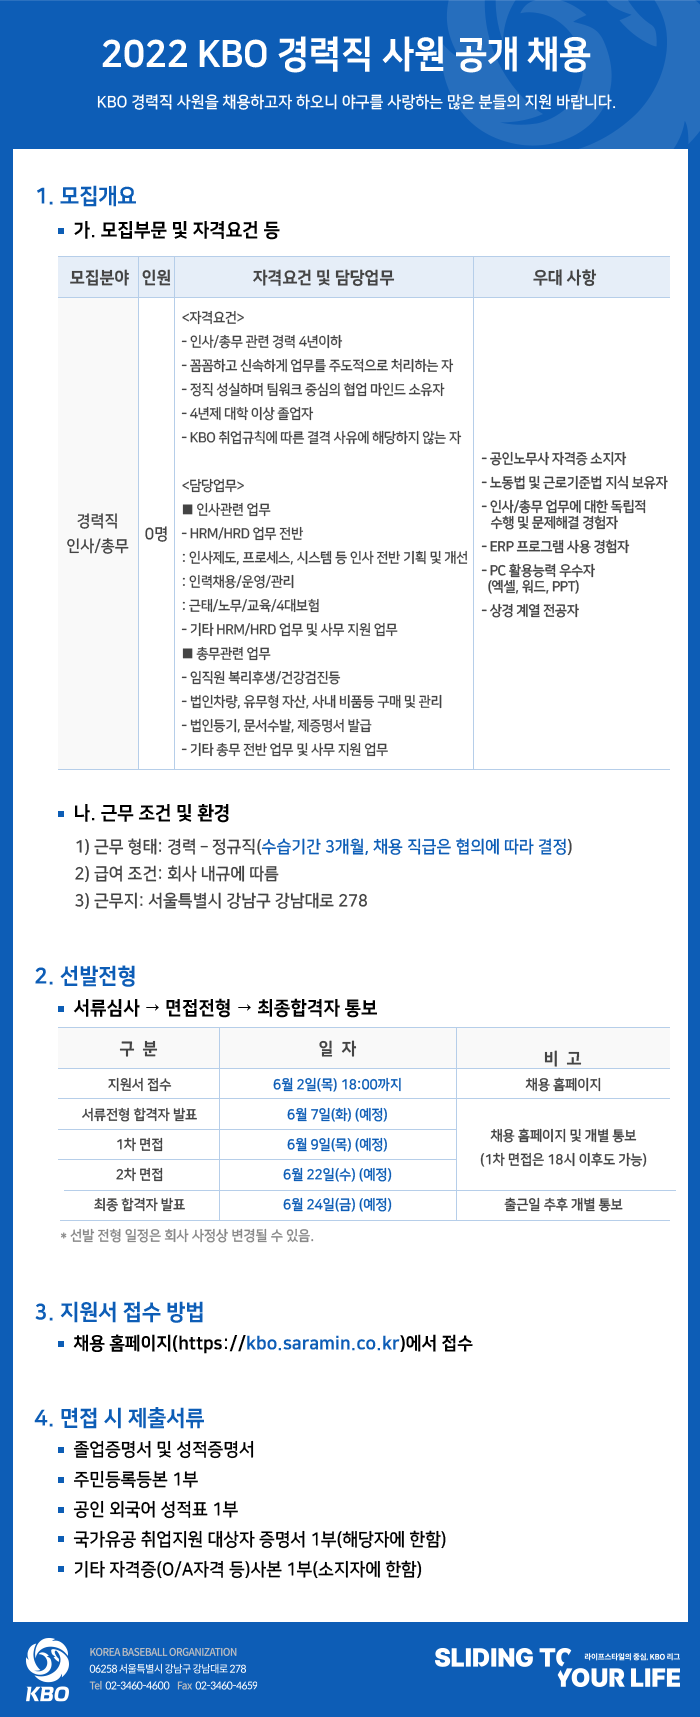 notice/images/2022/5/2022 KBO 경력지 사원 공개 채용_0520.png